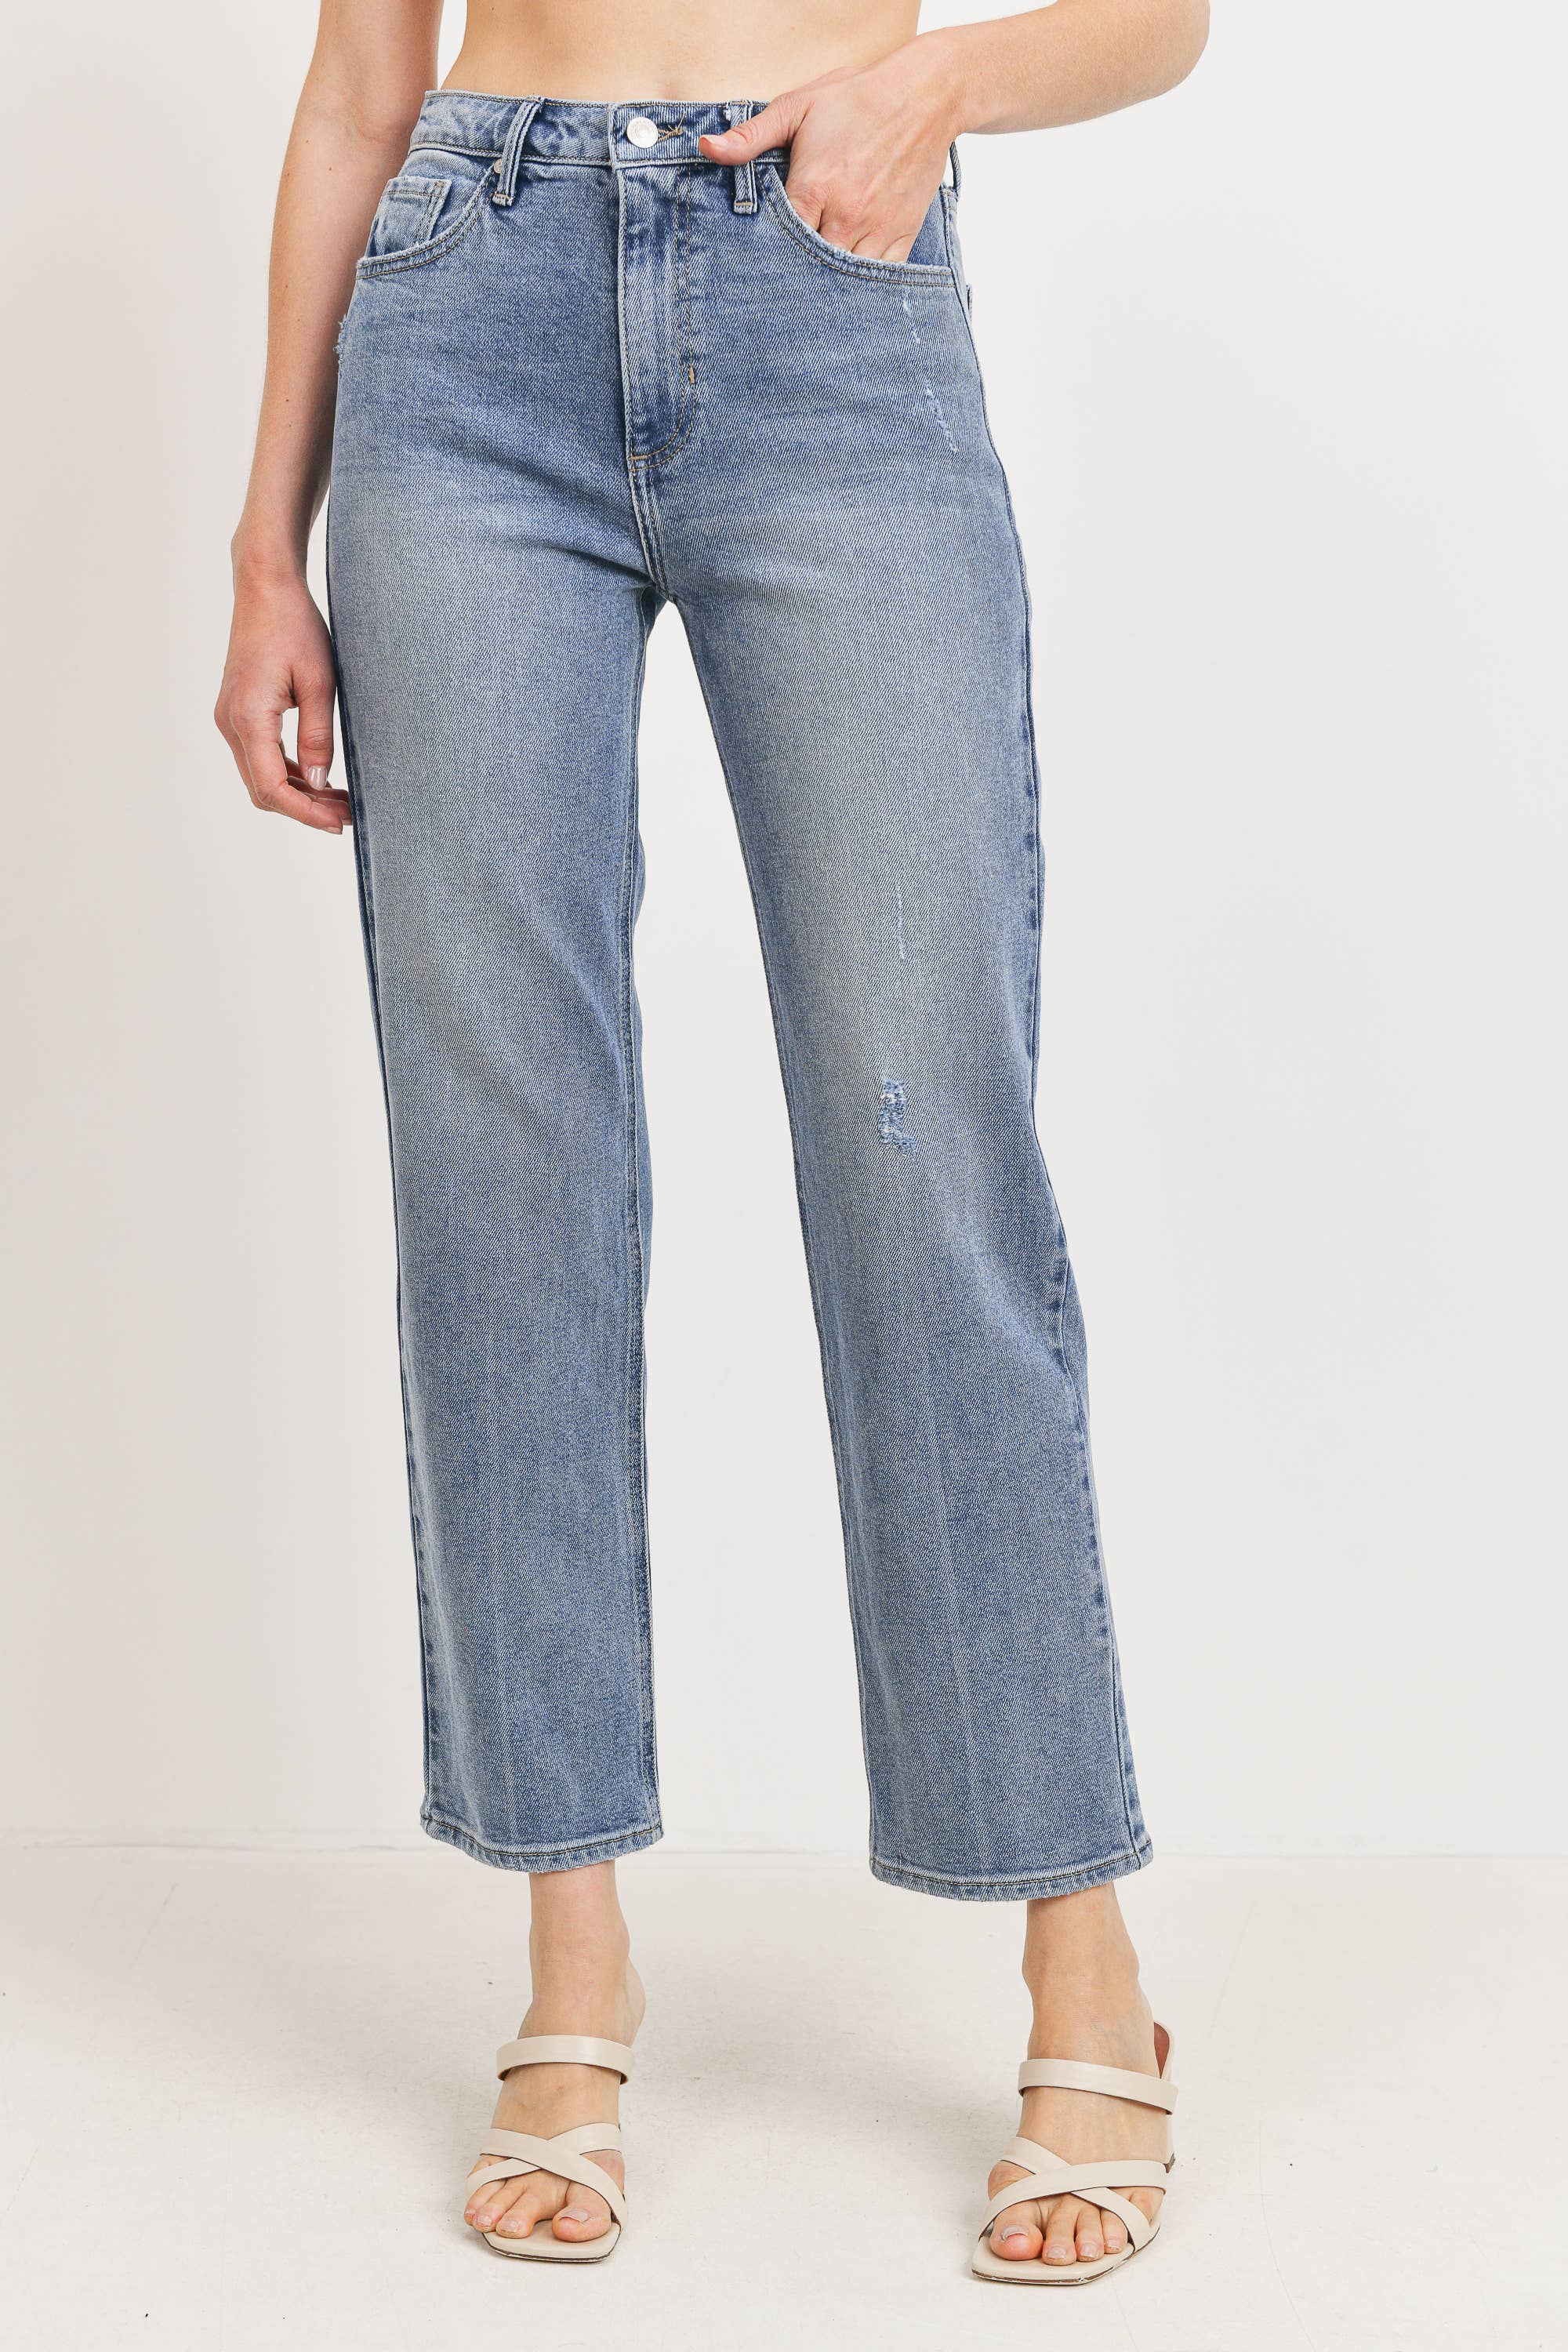 The Dell Full Length True Vintage Straight Jeans by Just Black Denim